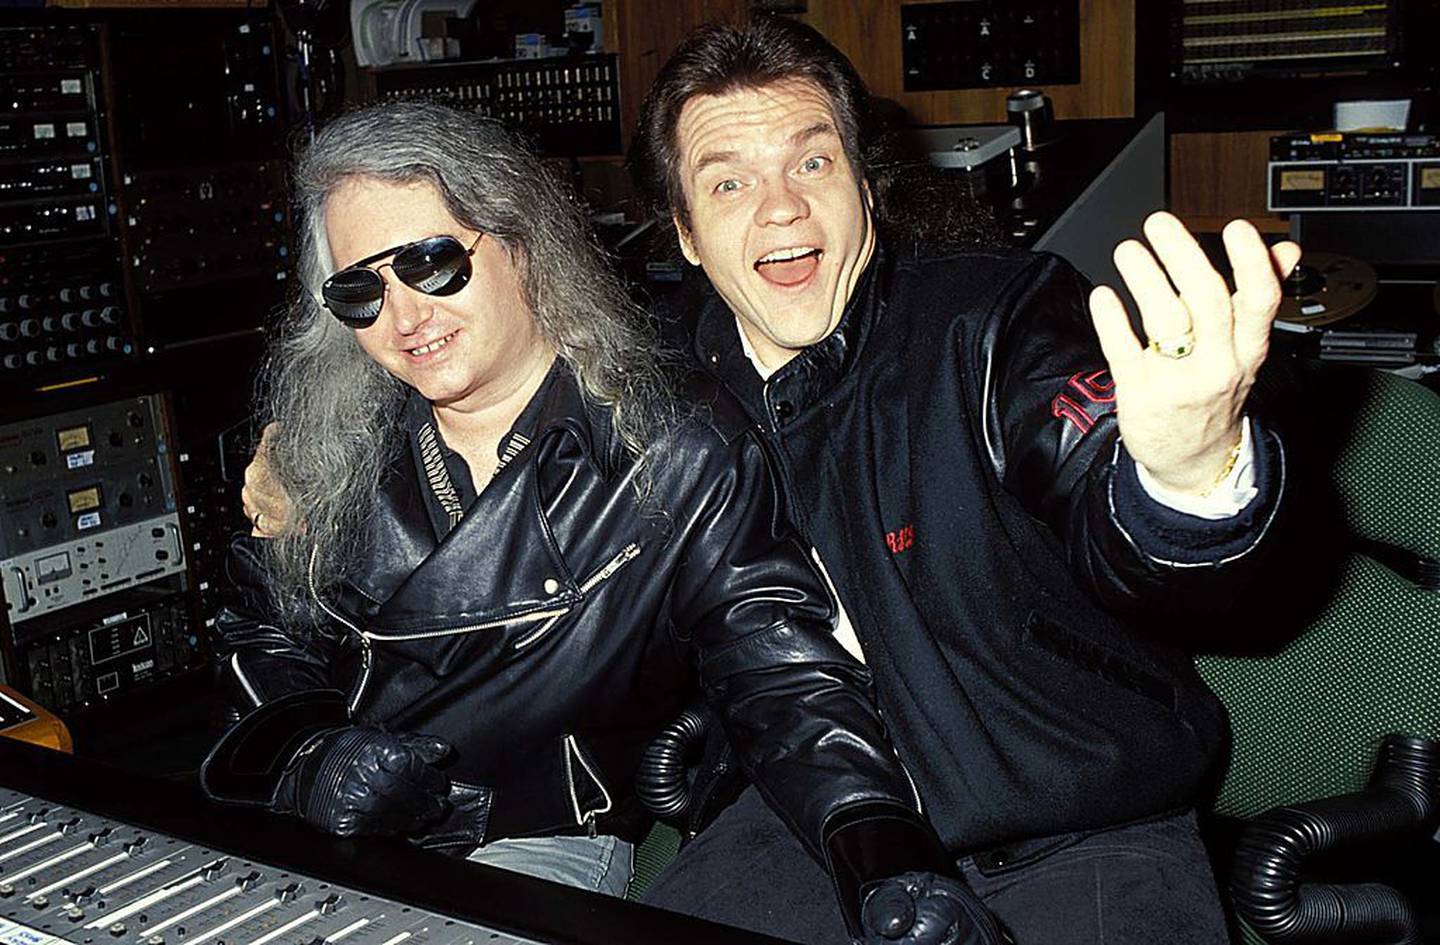 Meat Loaf and Jim Steinman during Meat Loaf in Studio Recording Bat Out of Hell II in Los Angeles in 1991. Photo / Getty Images